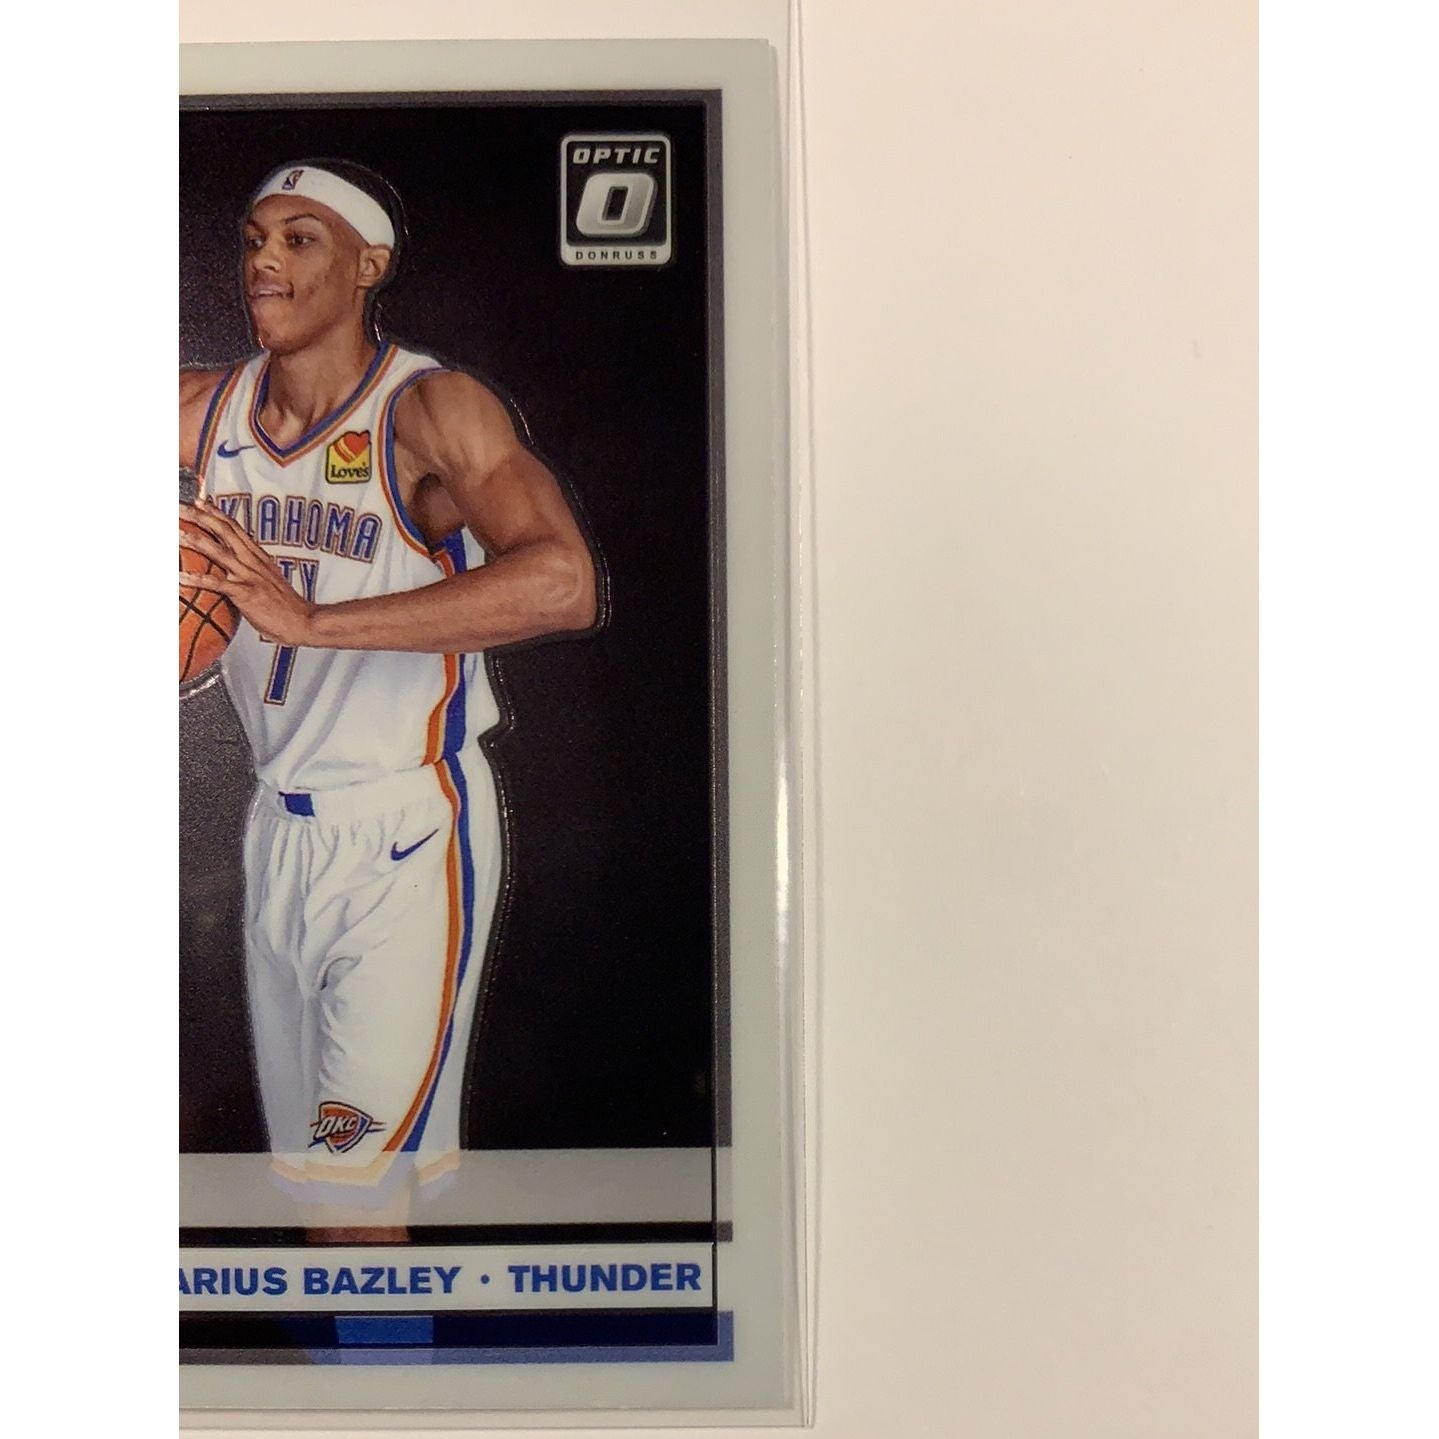  2019-20 Donruss Optic Darius Bazley Rated Rookie  Local Legends Cards & Collectibles